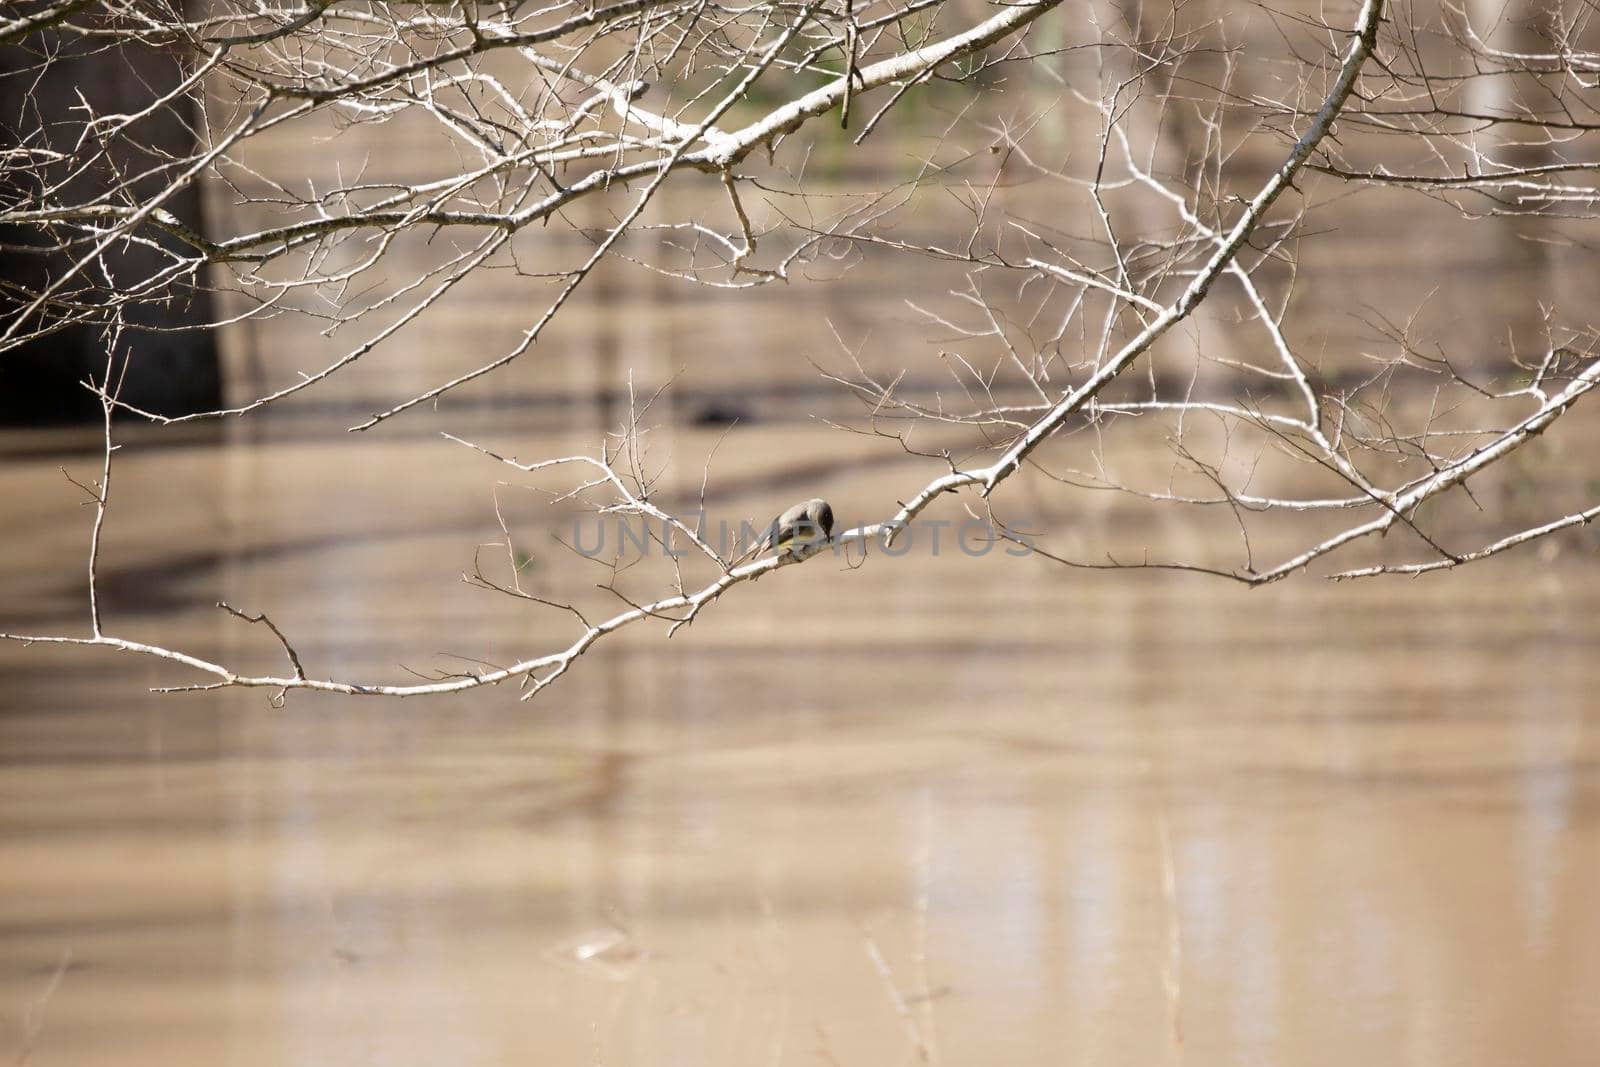 Eastern phoebe (Sayornis phoebe) foraging on a bare branch hanging over muddy water